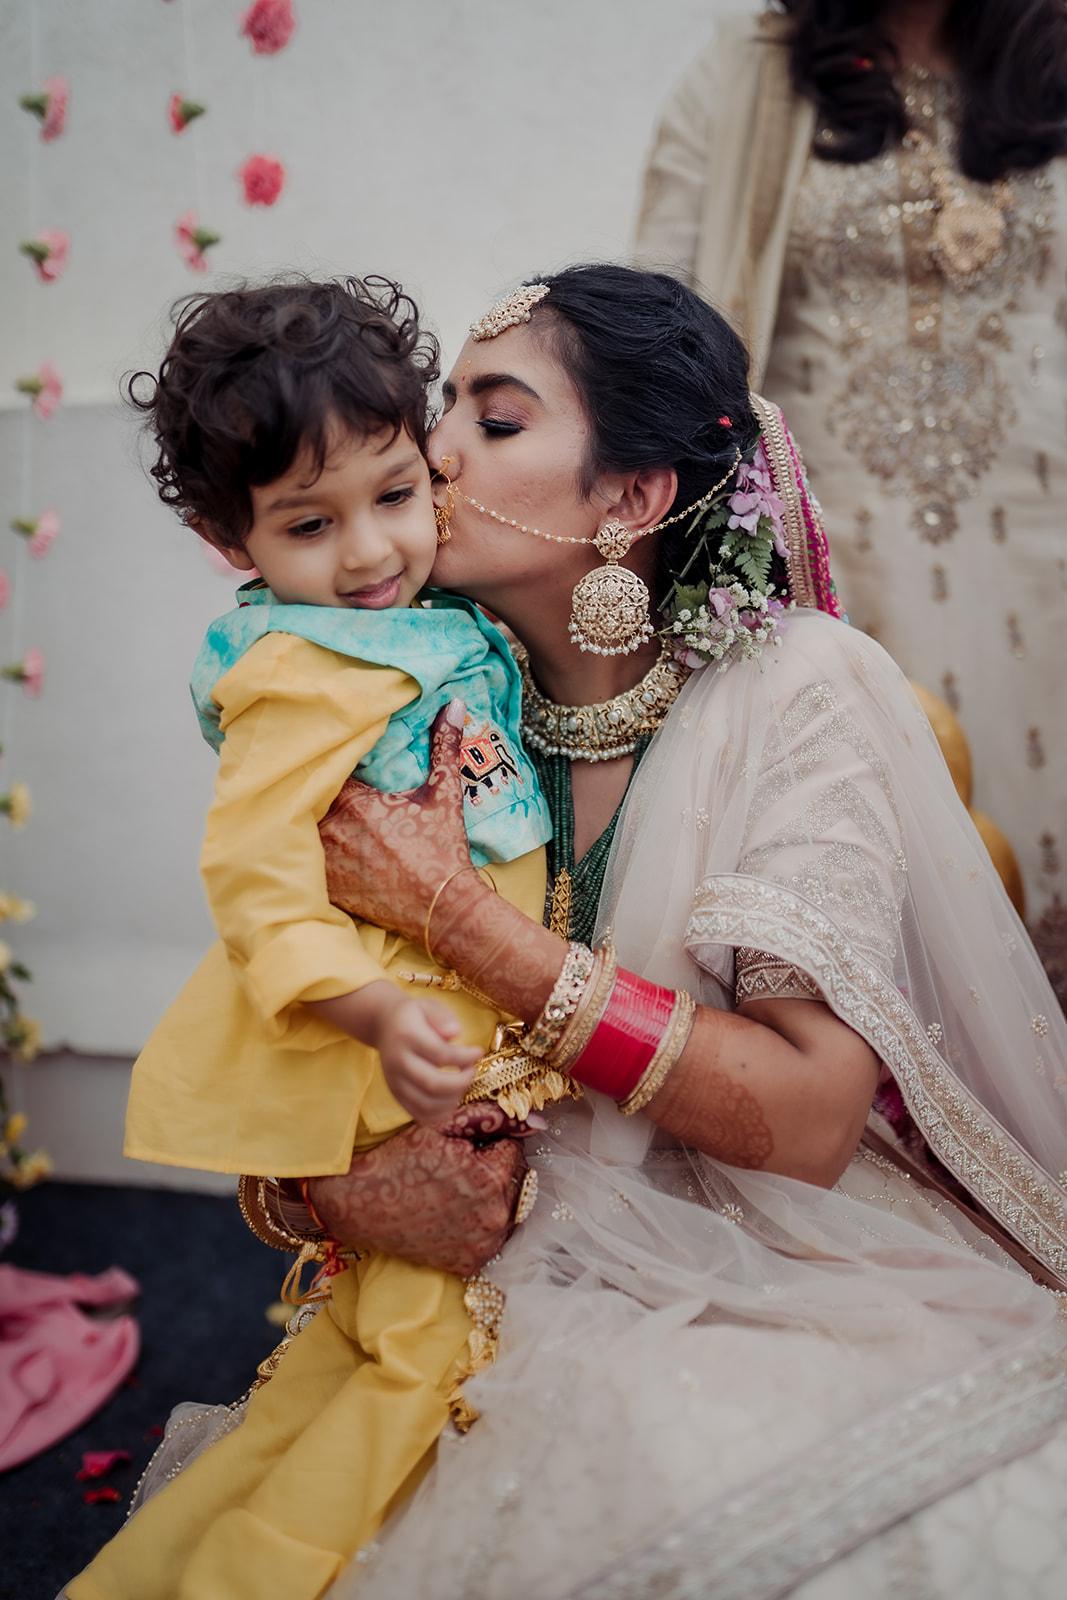 Generational love: Bride bonds with a sweet baby, capturing a moment of familial connection